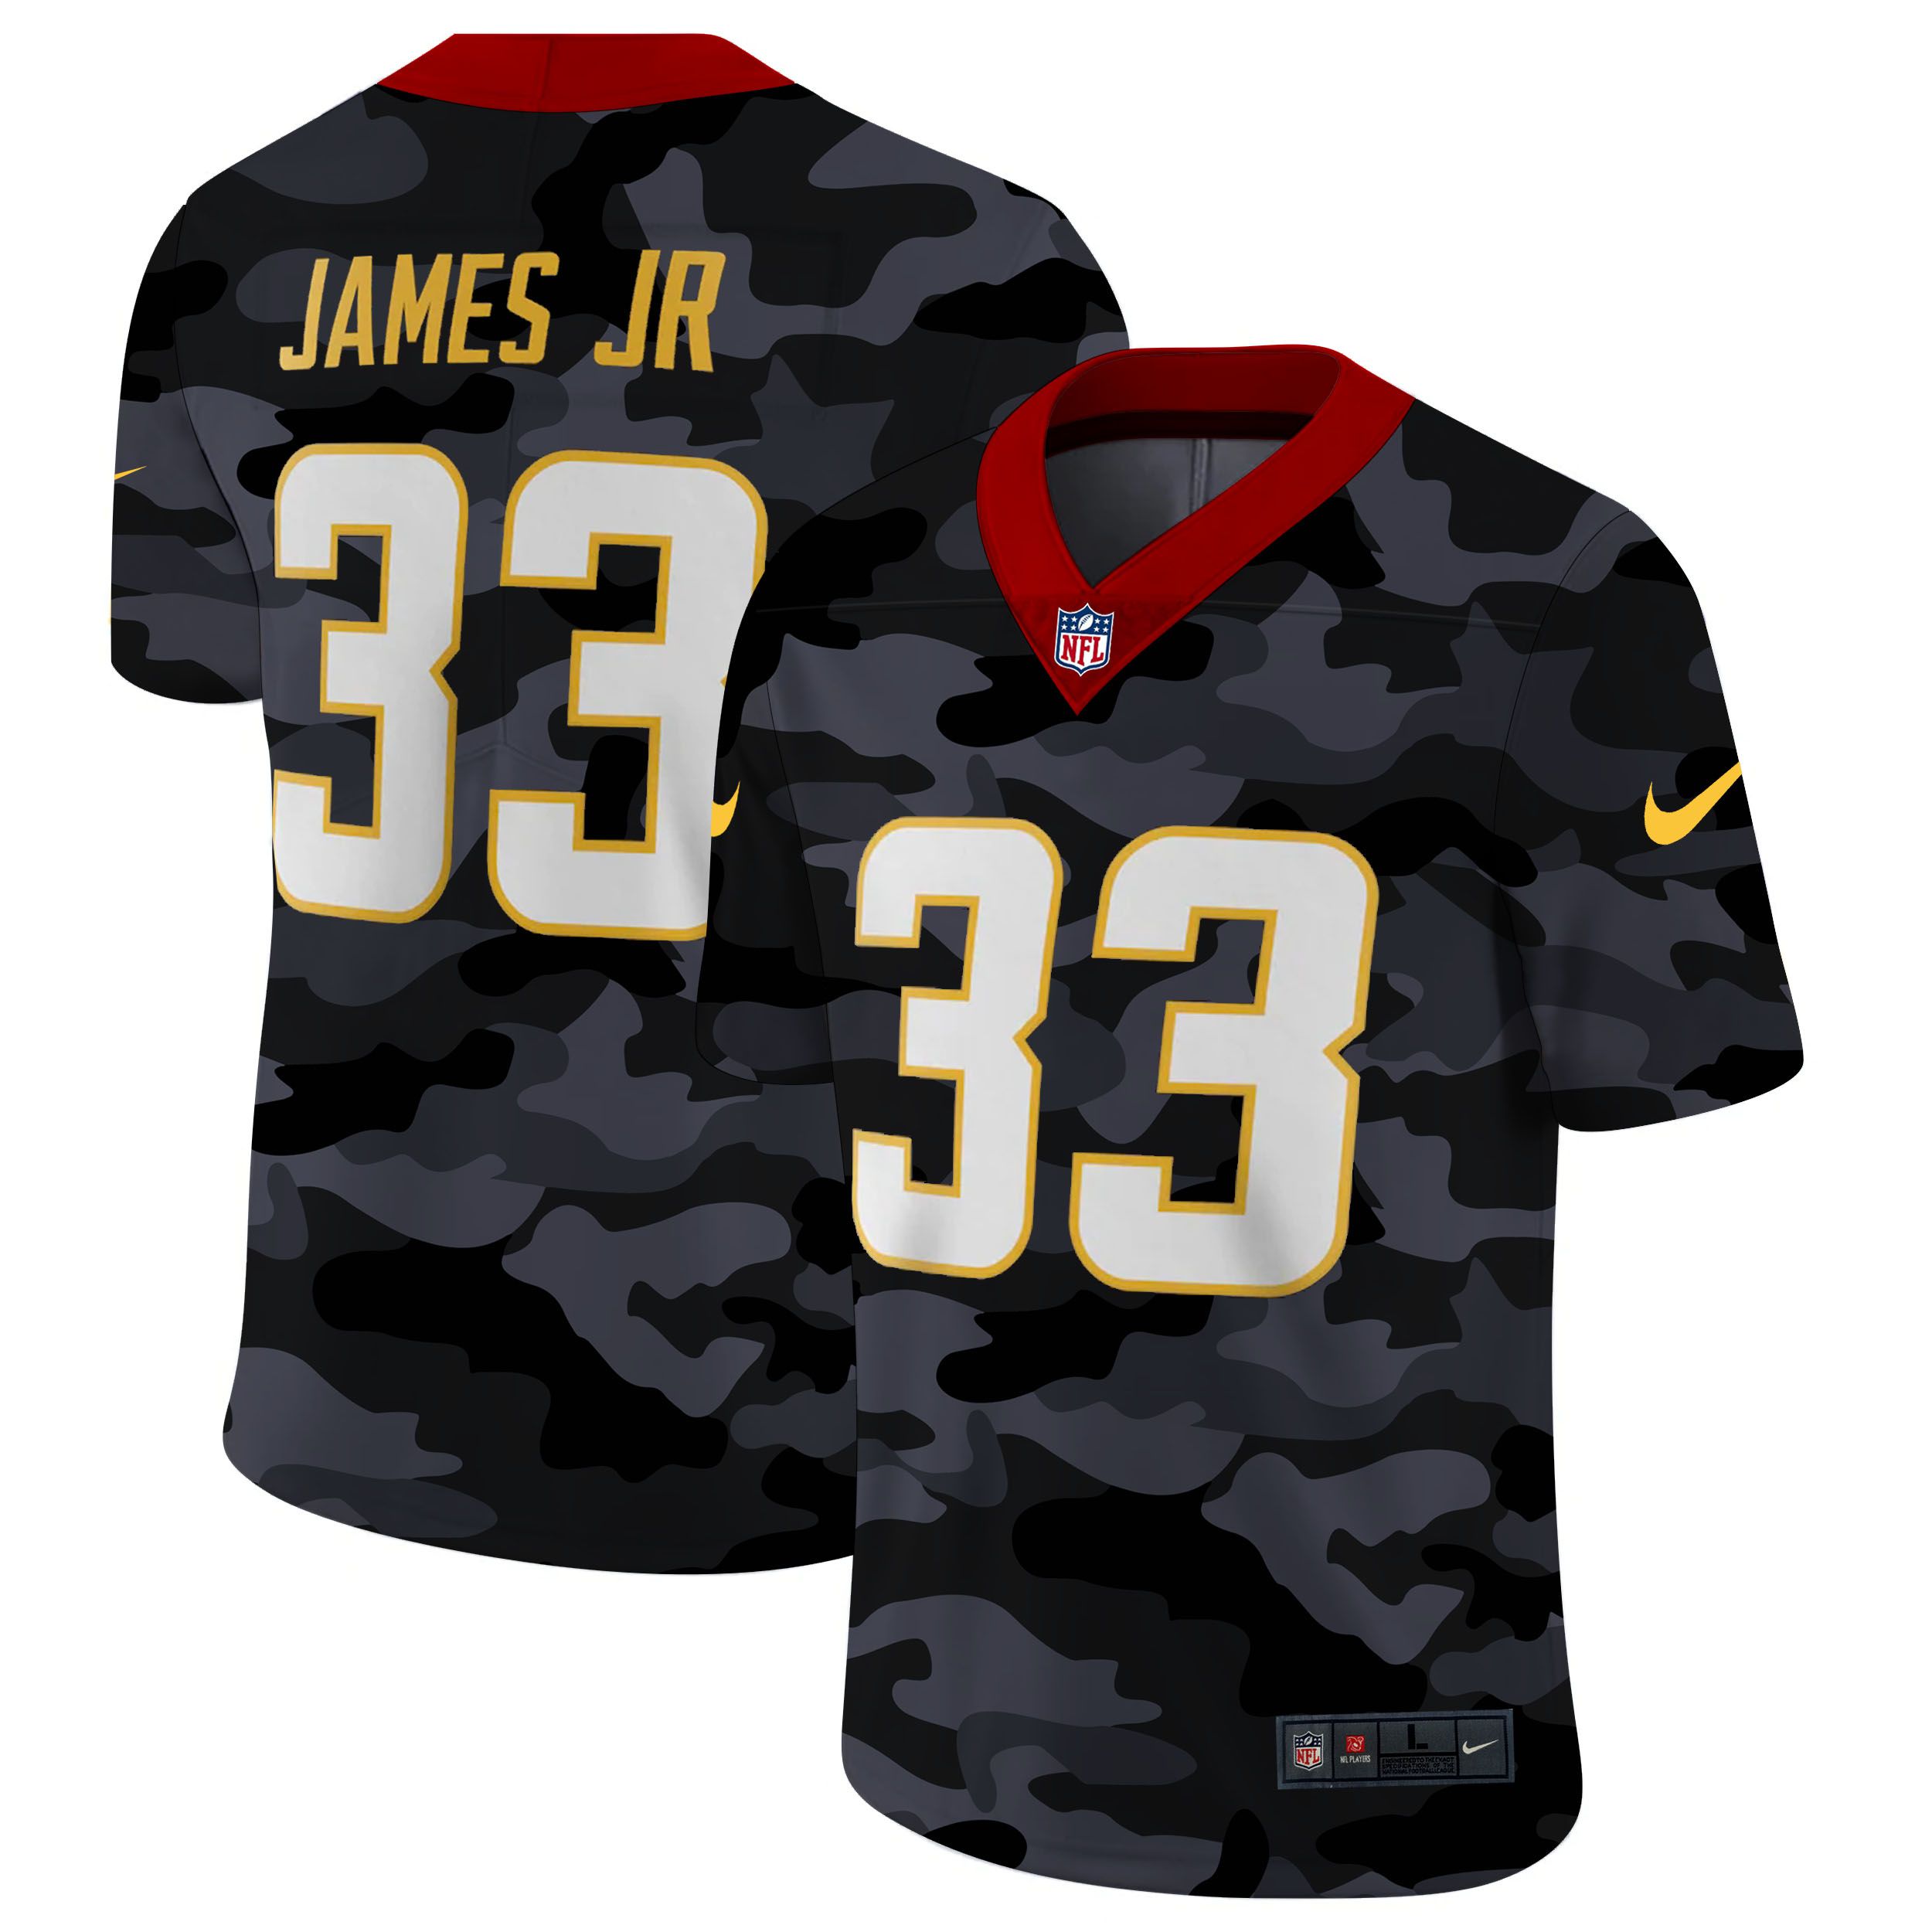 Men San Diego Chargers #33 James jr 2020 Nike 2ndCamo Salute to Service Limited NFL Jerseys